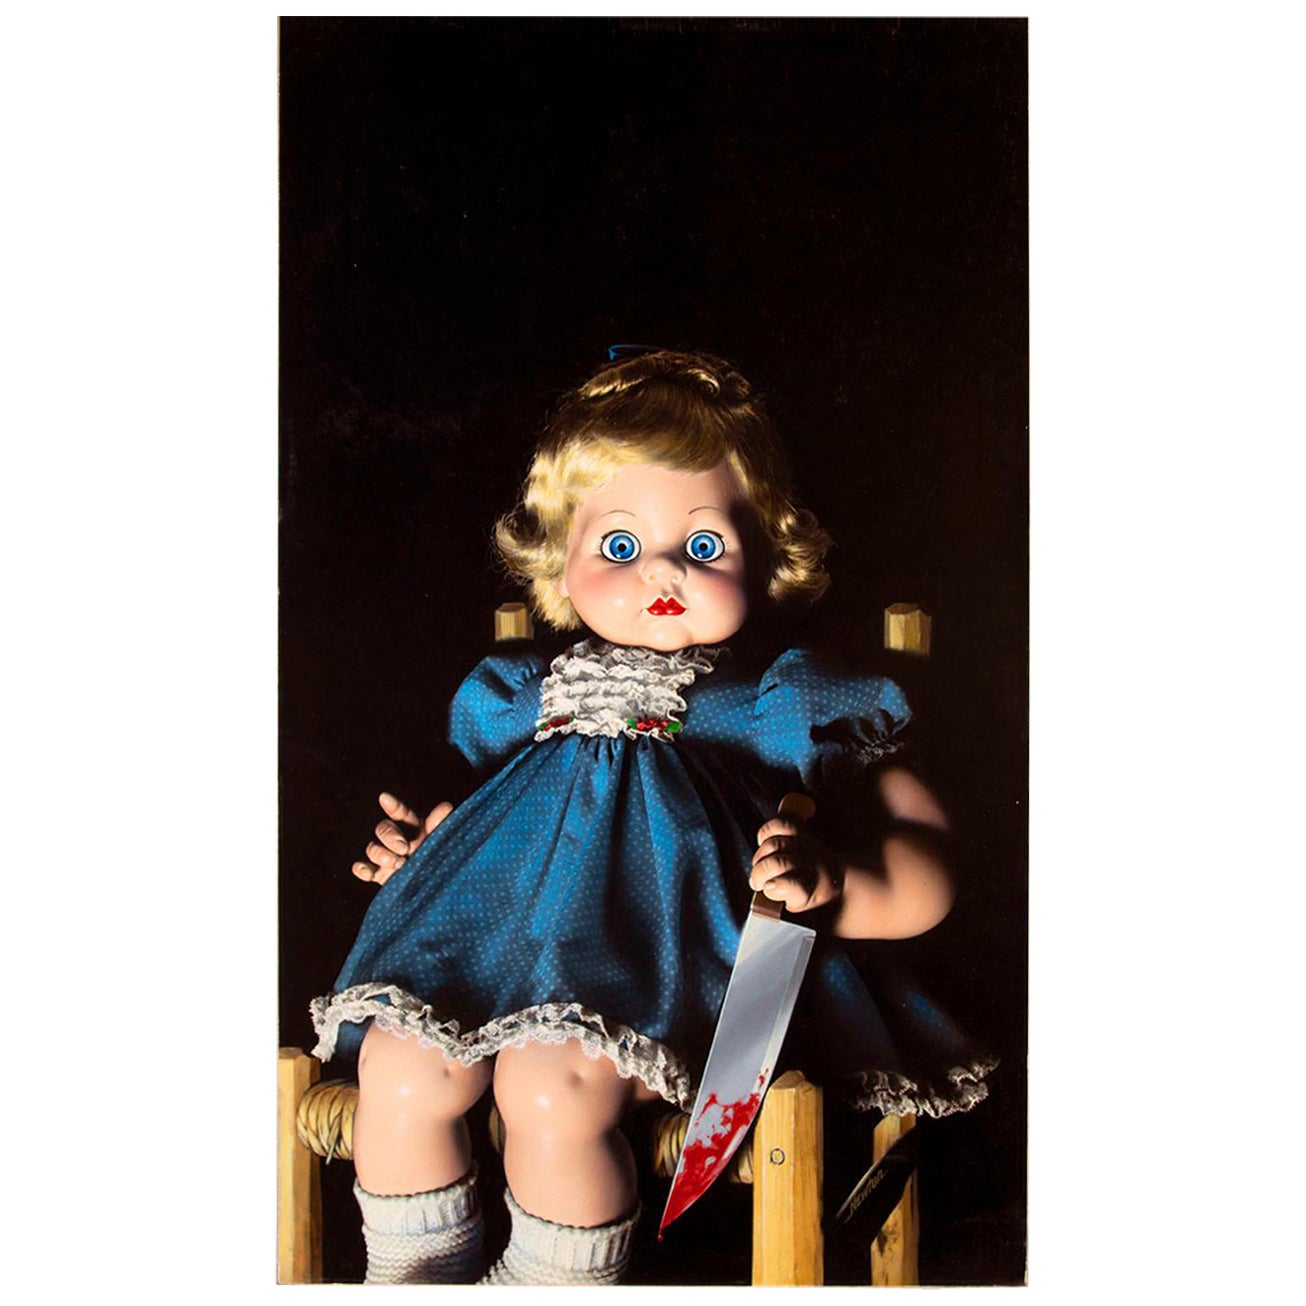 Doll Mixed Media Painting and Original Book Cover